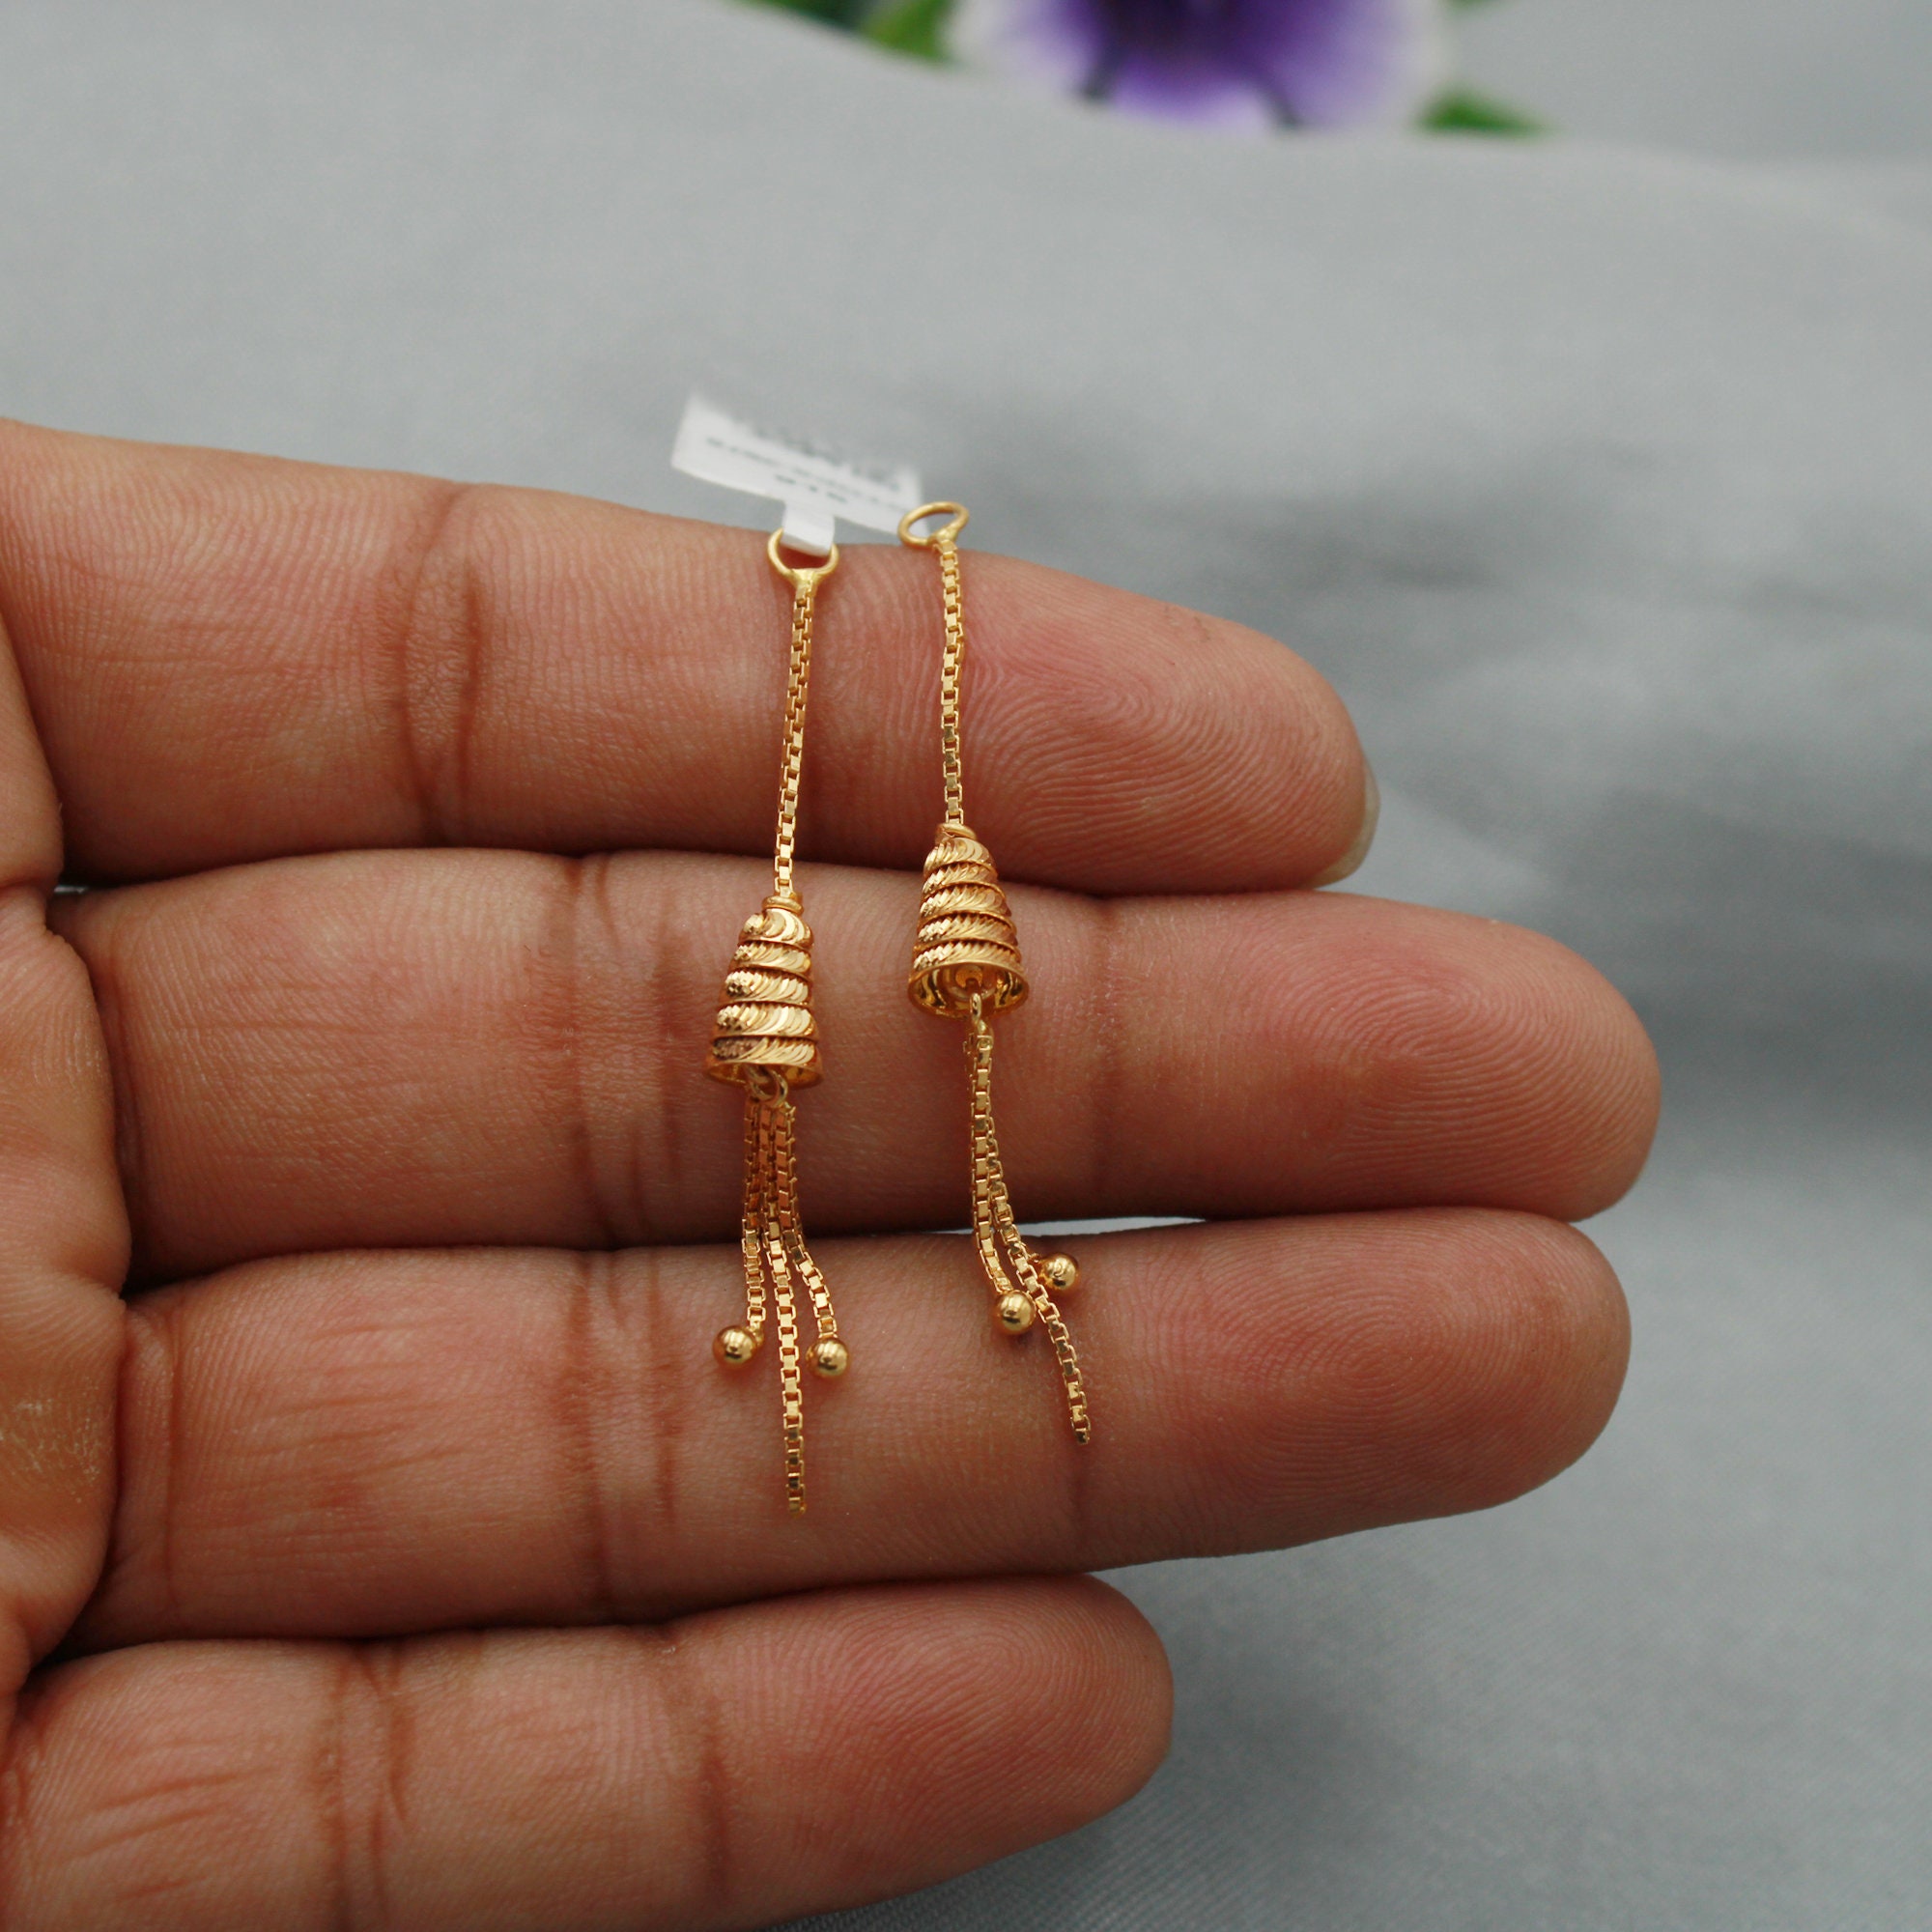 Sui Dhaga 22k Gold Dangling for Earrings Indian Jewelry - Etsy Denmark